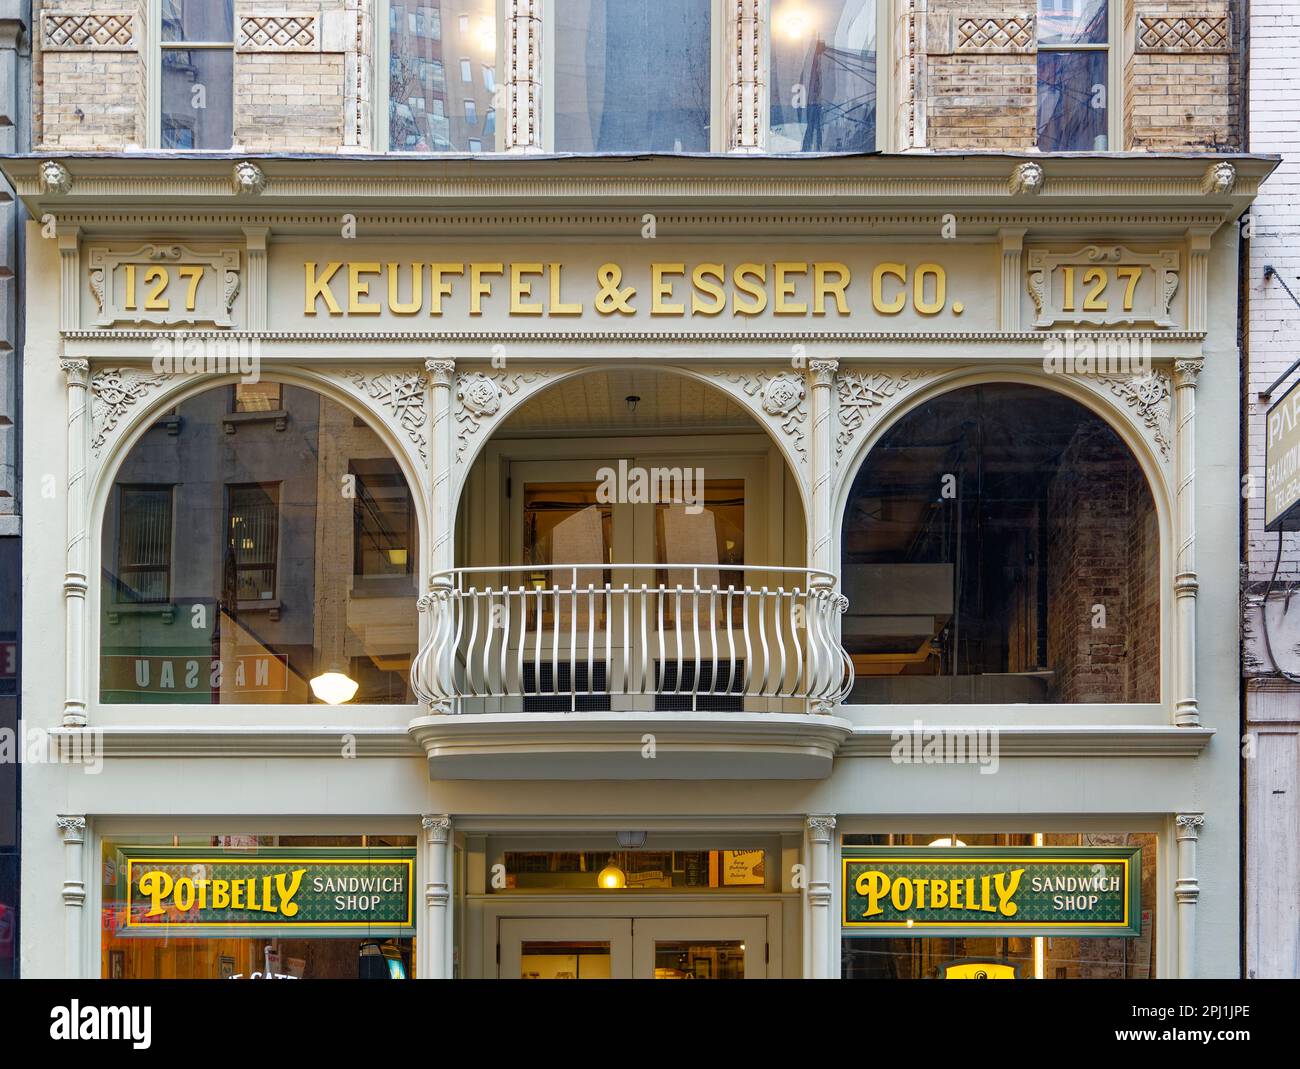 https://c8.alamy.com/comp/2PJ1JPE/keuffel-esser-building-on-fulton-street-has-elaborate-terra-cotta-details-on-the-brick-facade-the-former-offices-and-showrooms-are-now-residences-2PJ1JPE.jpg